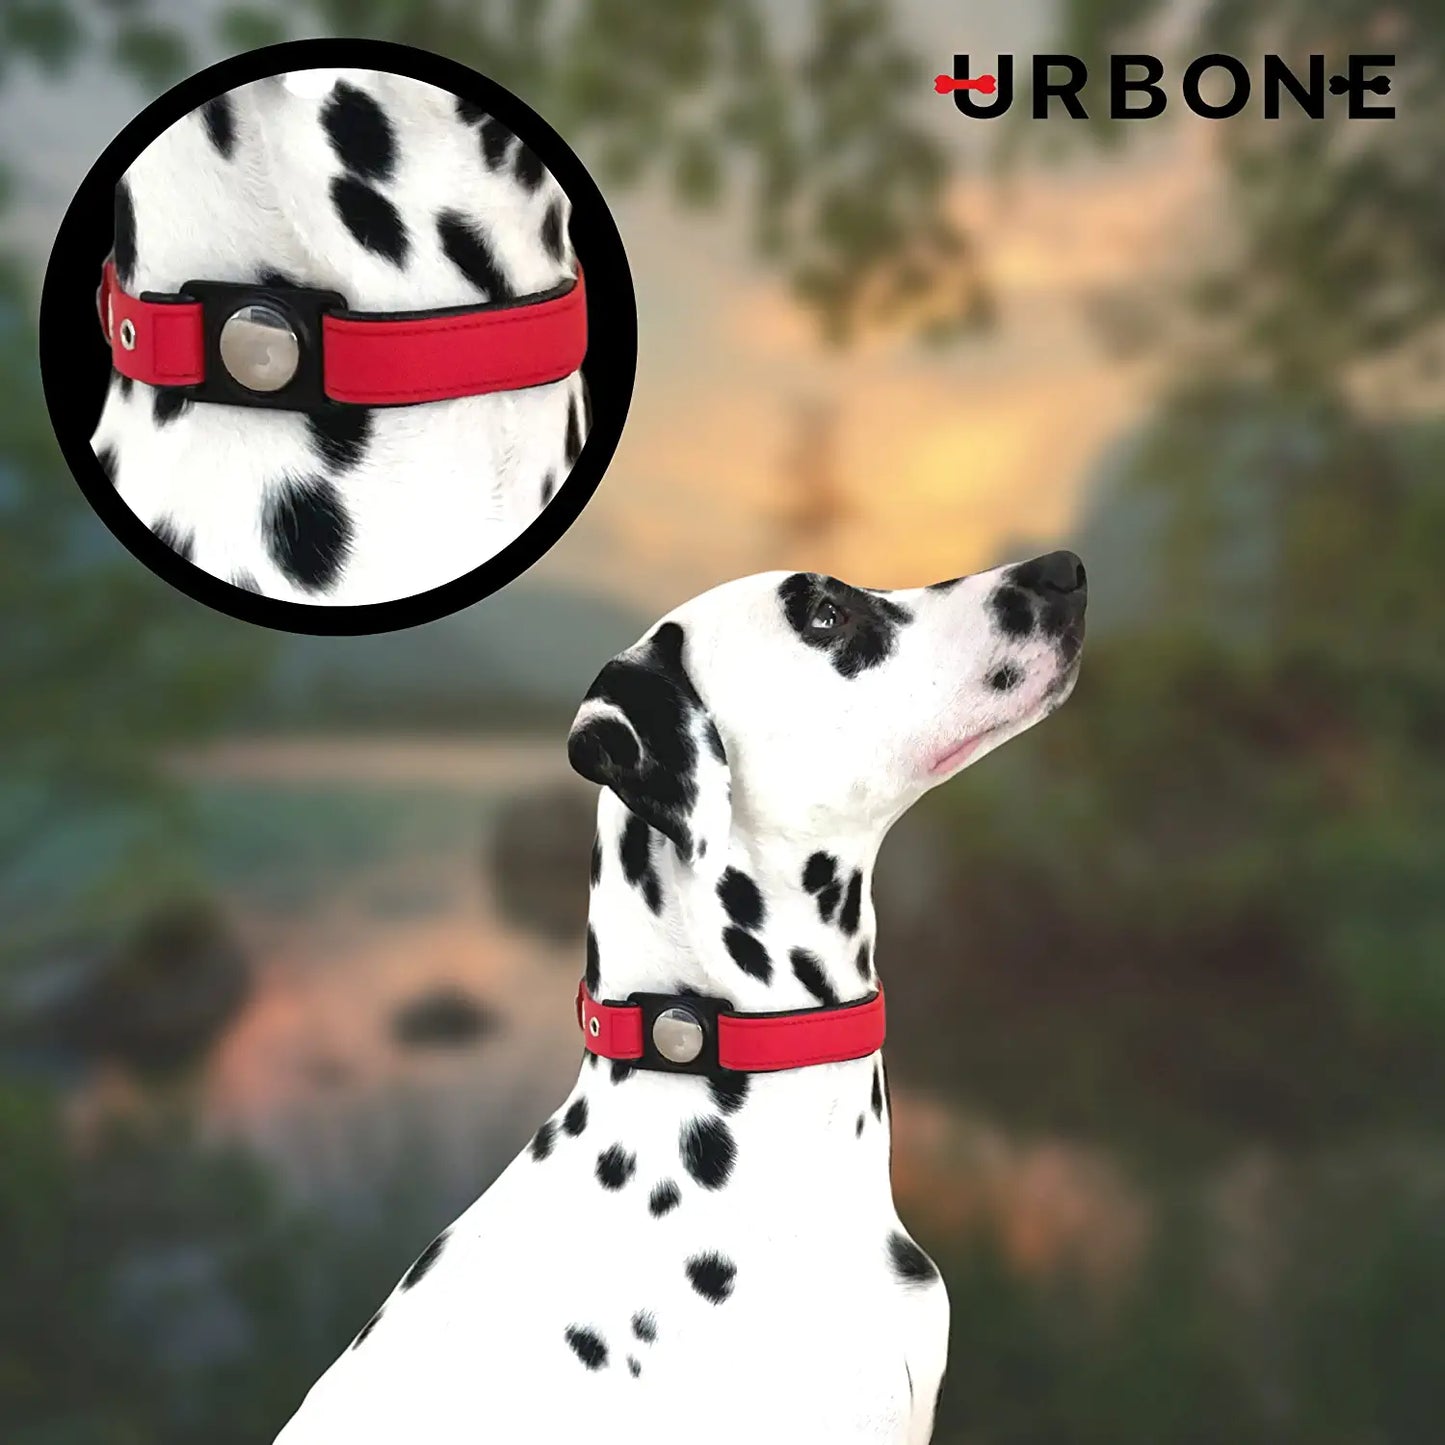 Urbone Airtag Dog Collar Holder - Strong Durable Metal Air Tag Case - Premium Protective Air Tag Loop for Pets - Airtag Case for Dog Collar Leash